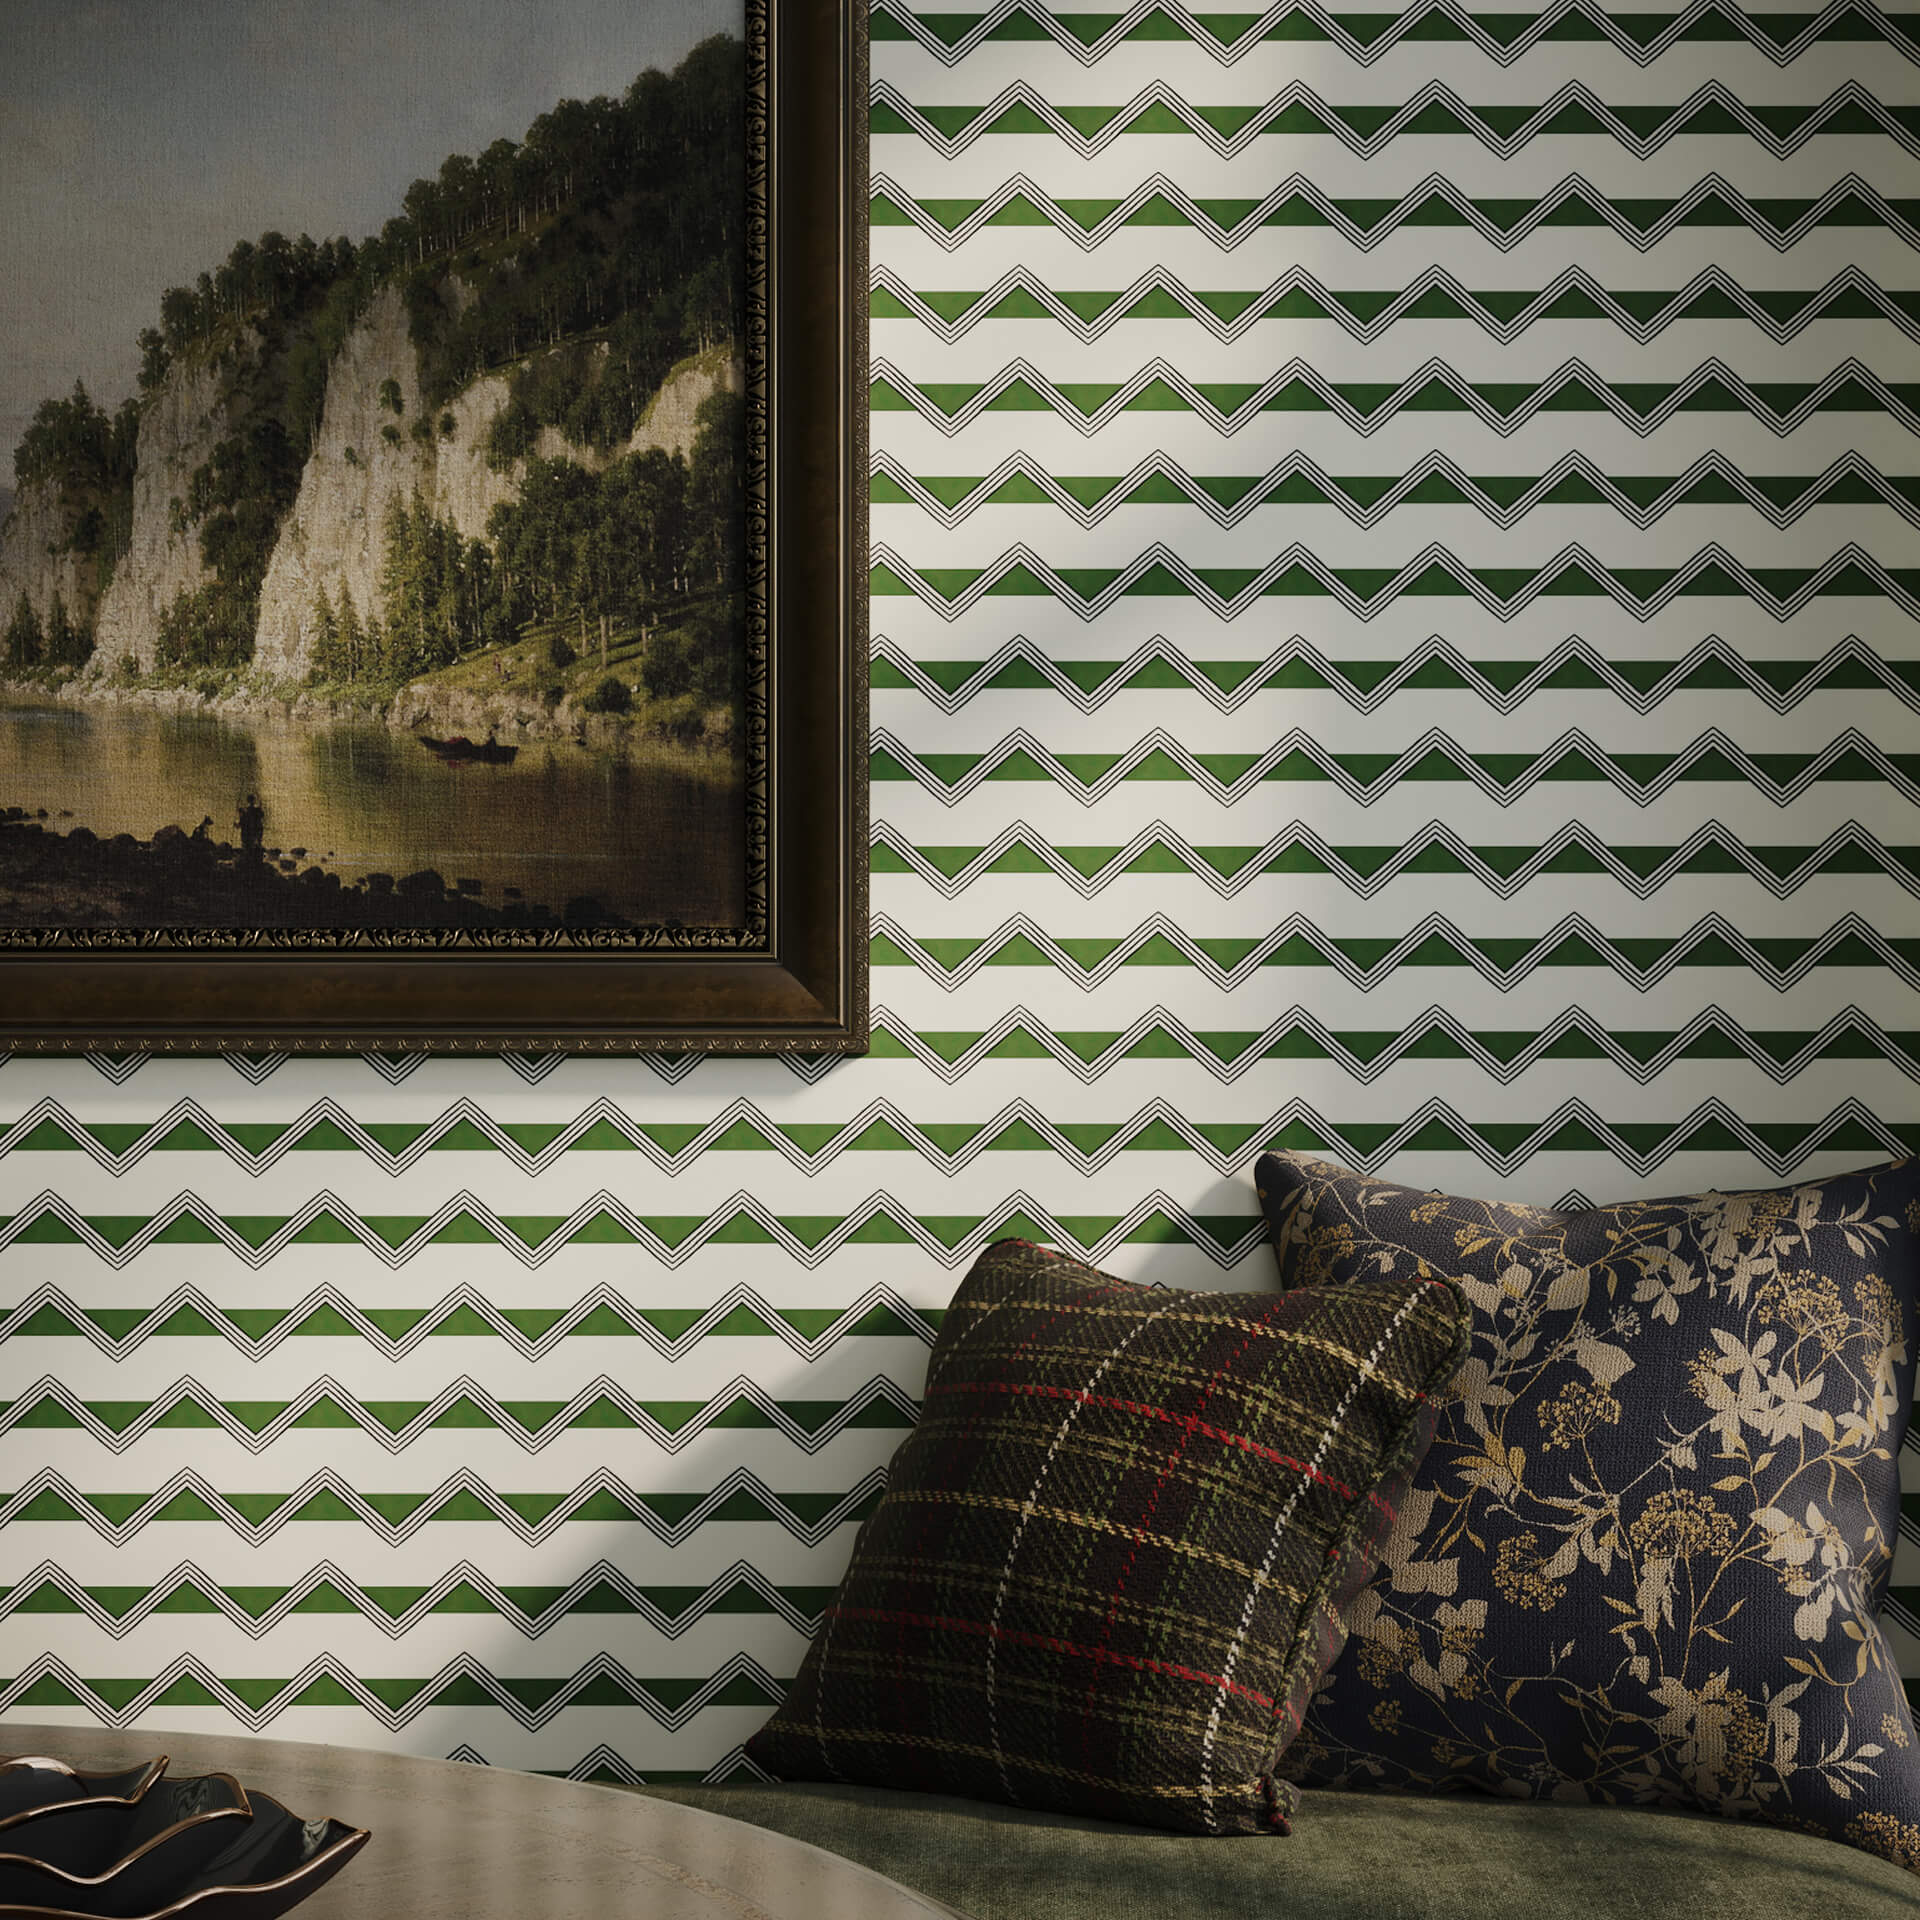 3D Visualization for Green and White Wall Coverings